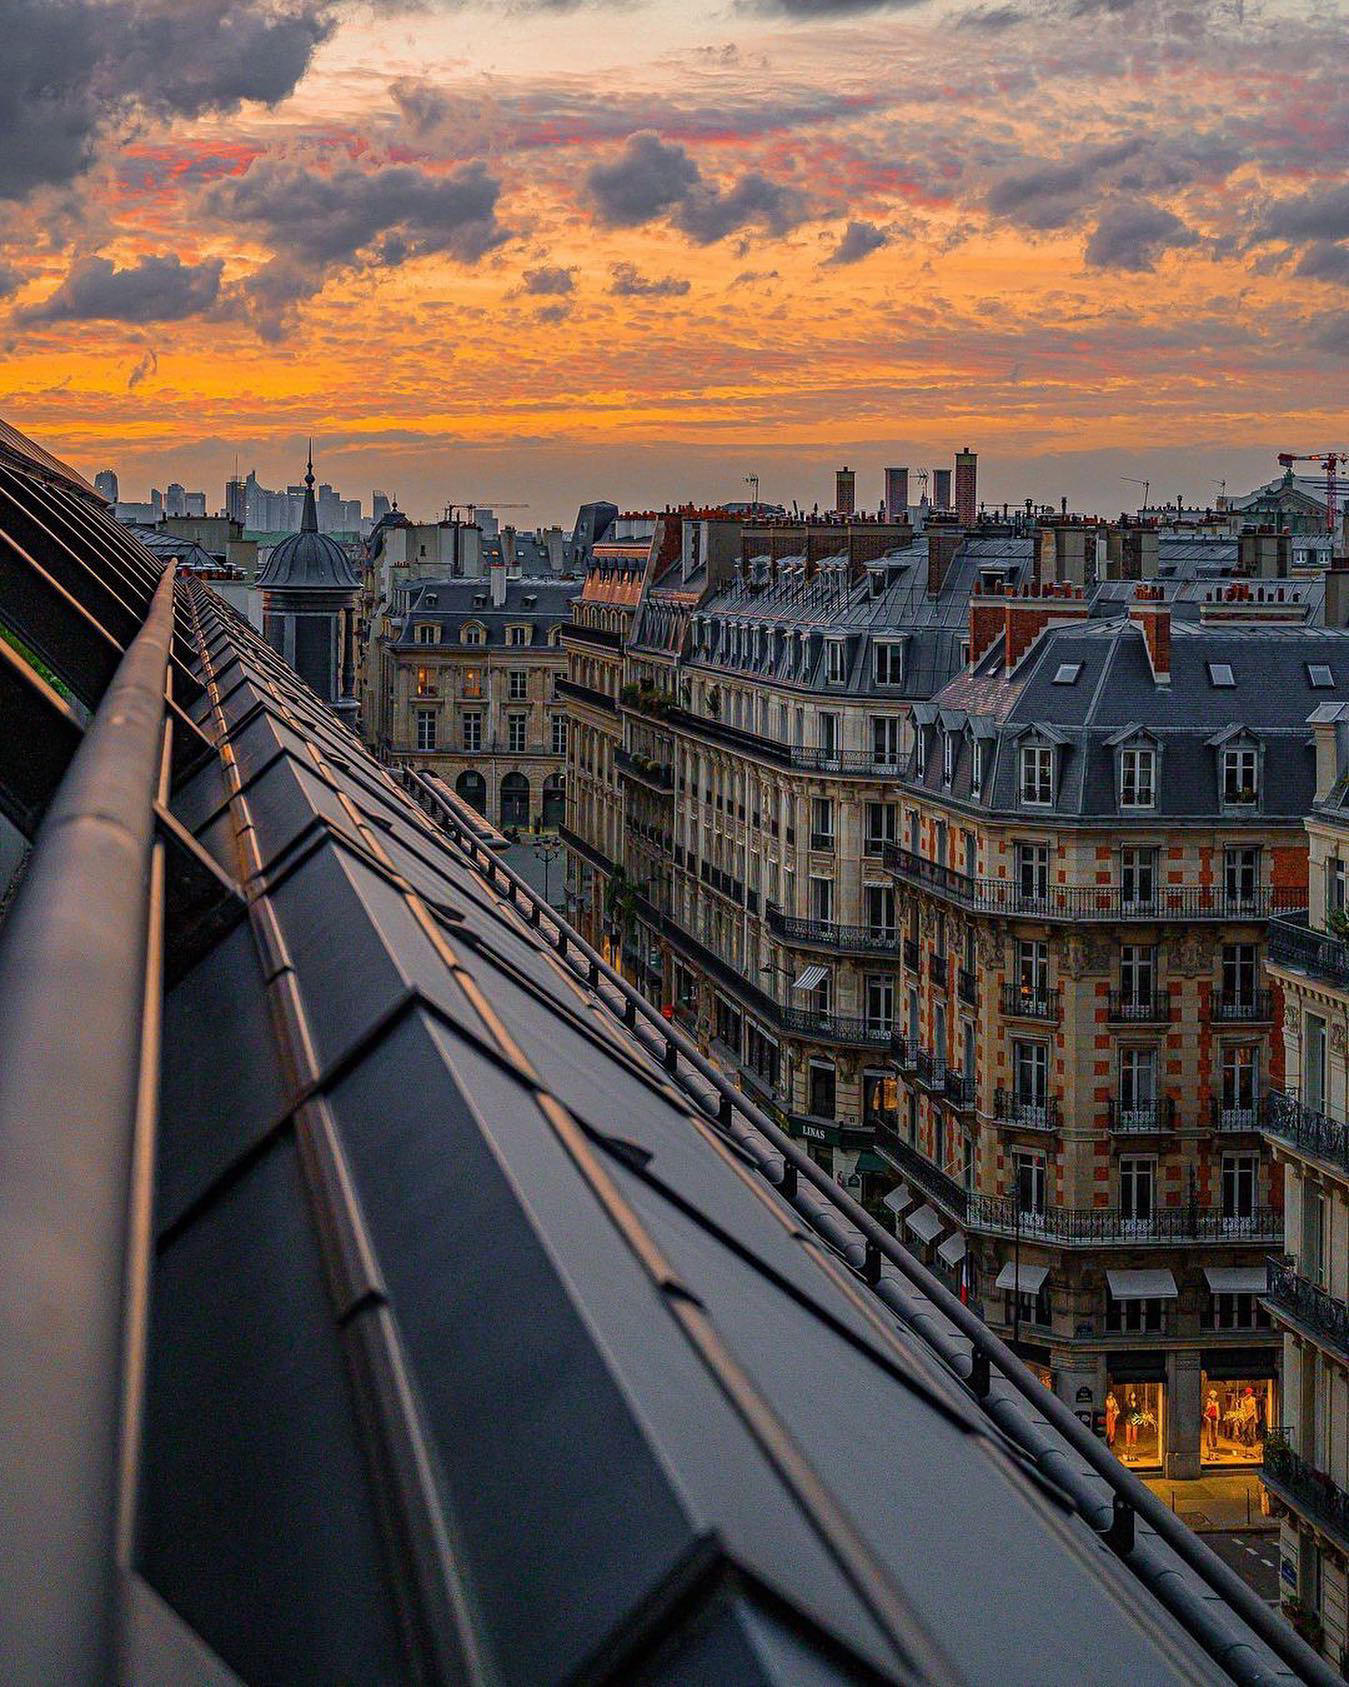 Paris Je t'aime - The Parisian sky likes to show off at sunset and we’re here for it